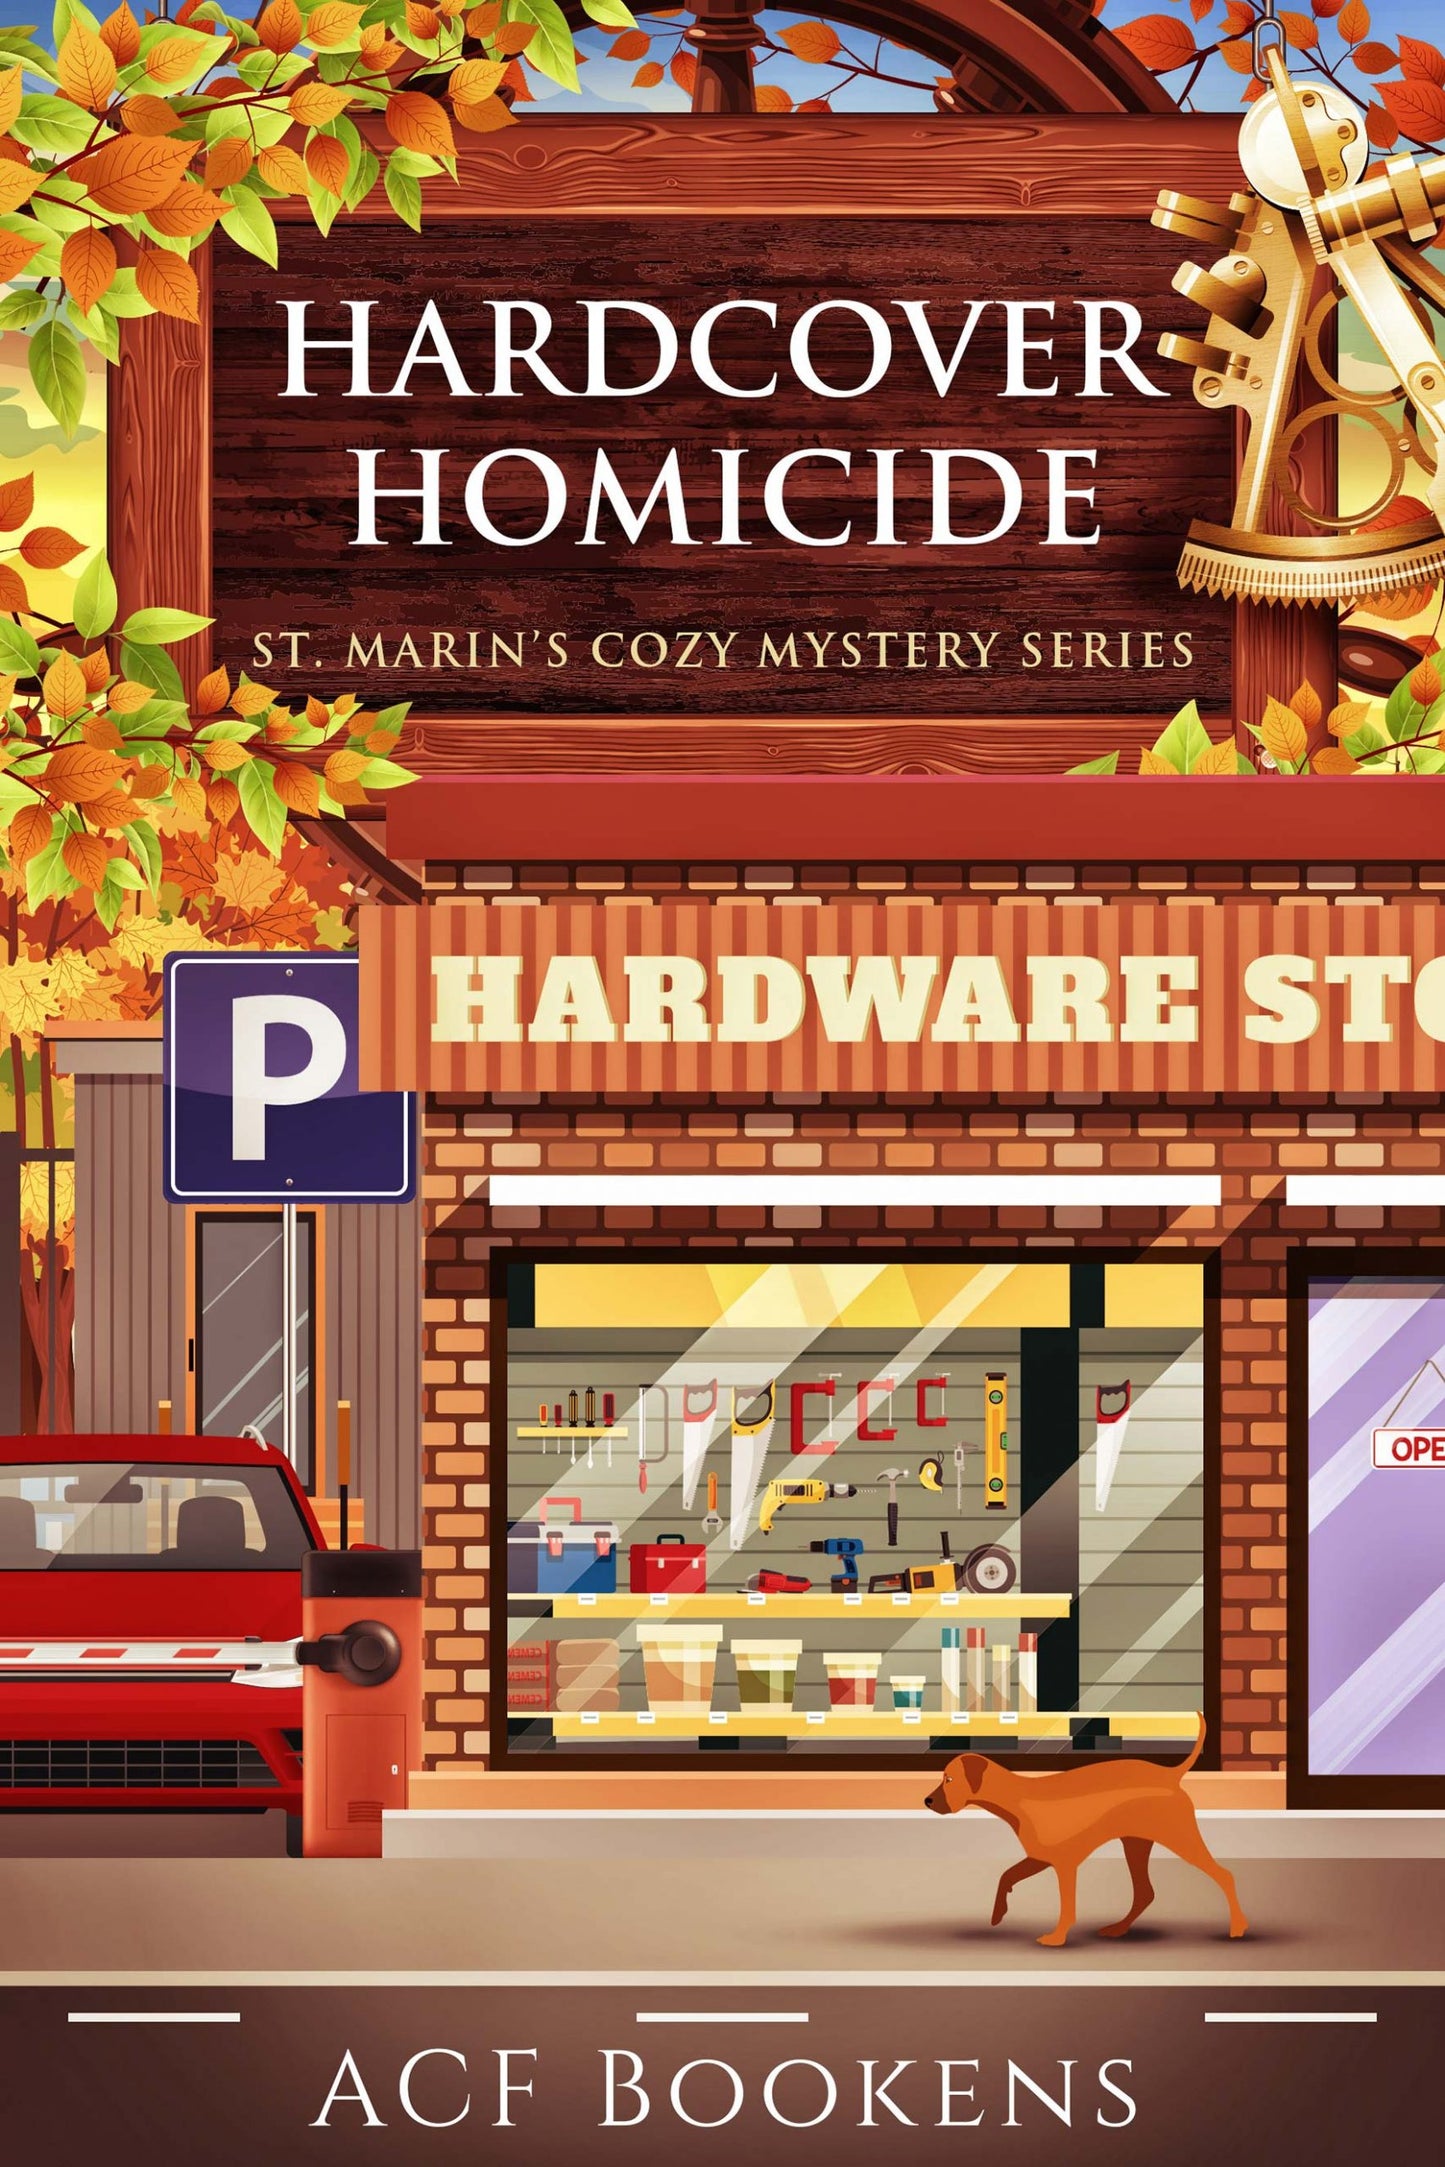 Hardcover Homicide (St. Marin's Cozy Mystery Series Book 9)